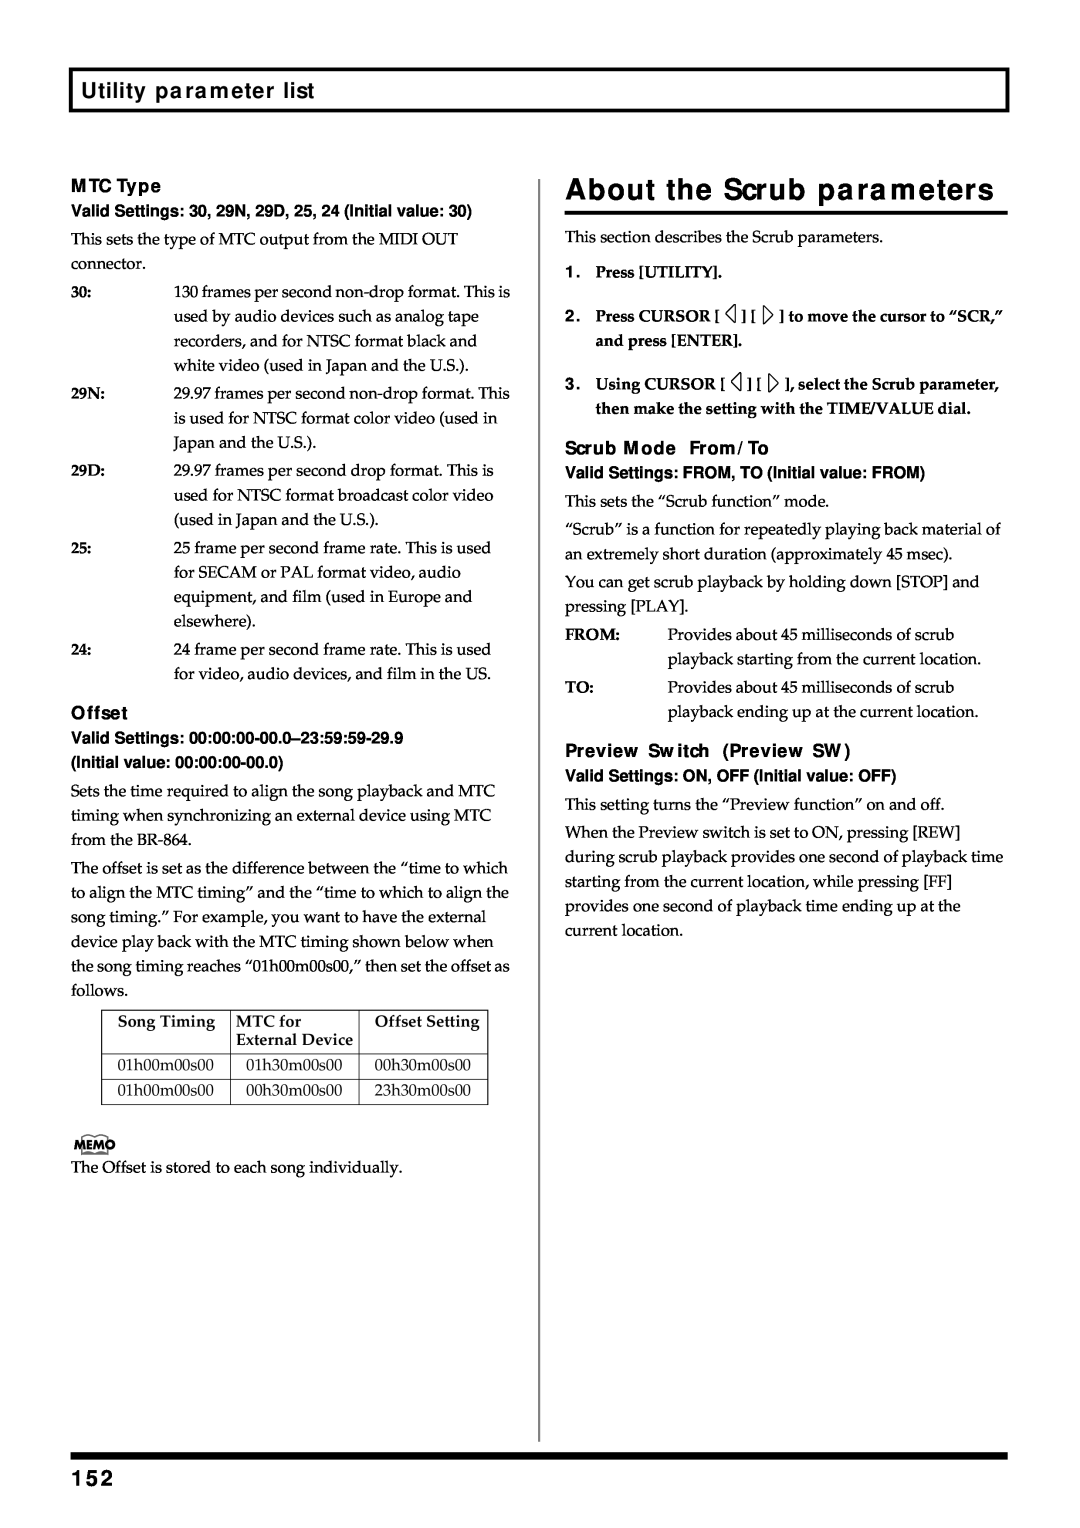 Roland BR-864 owner manual About the Scrub parameters, Utility parameter list 